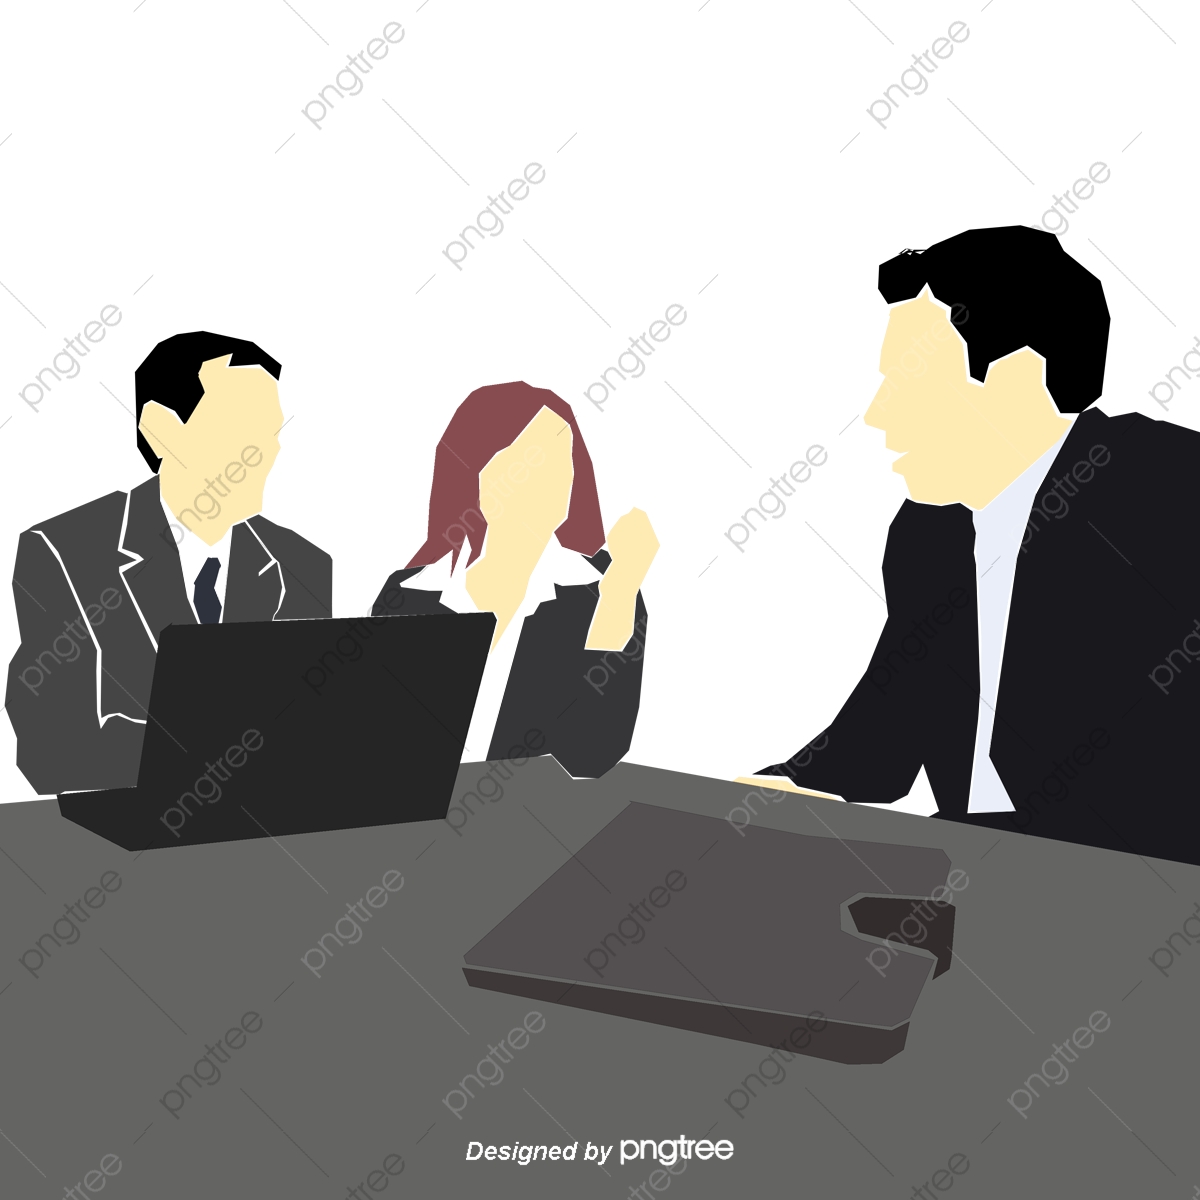 conference clipart formal meeting